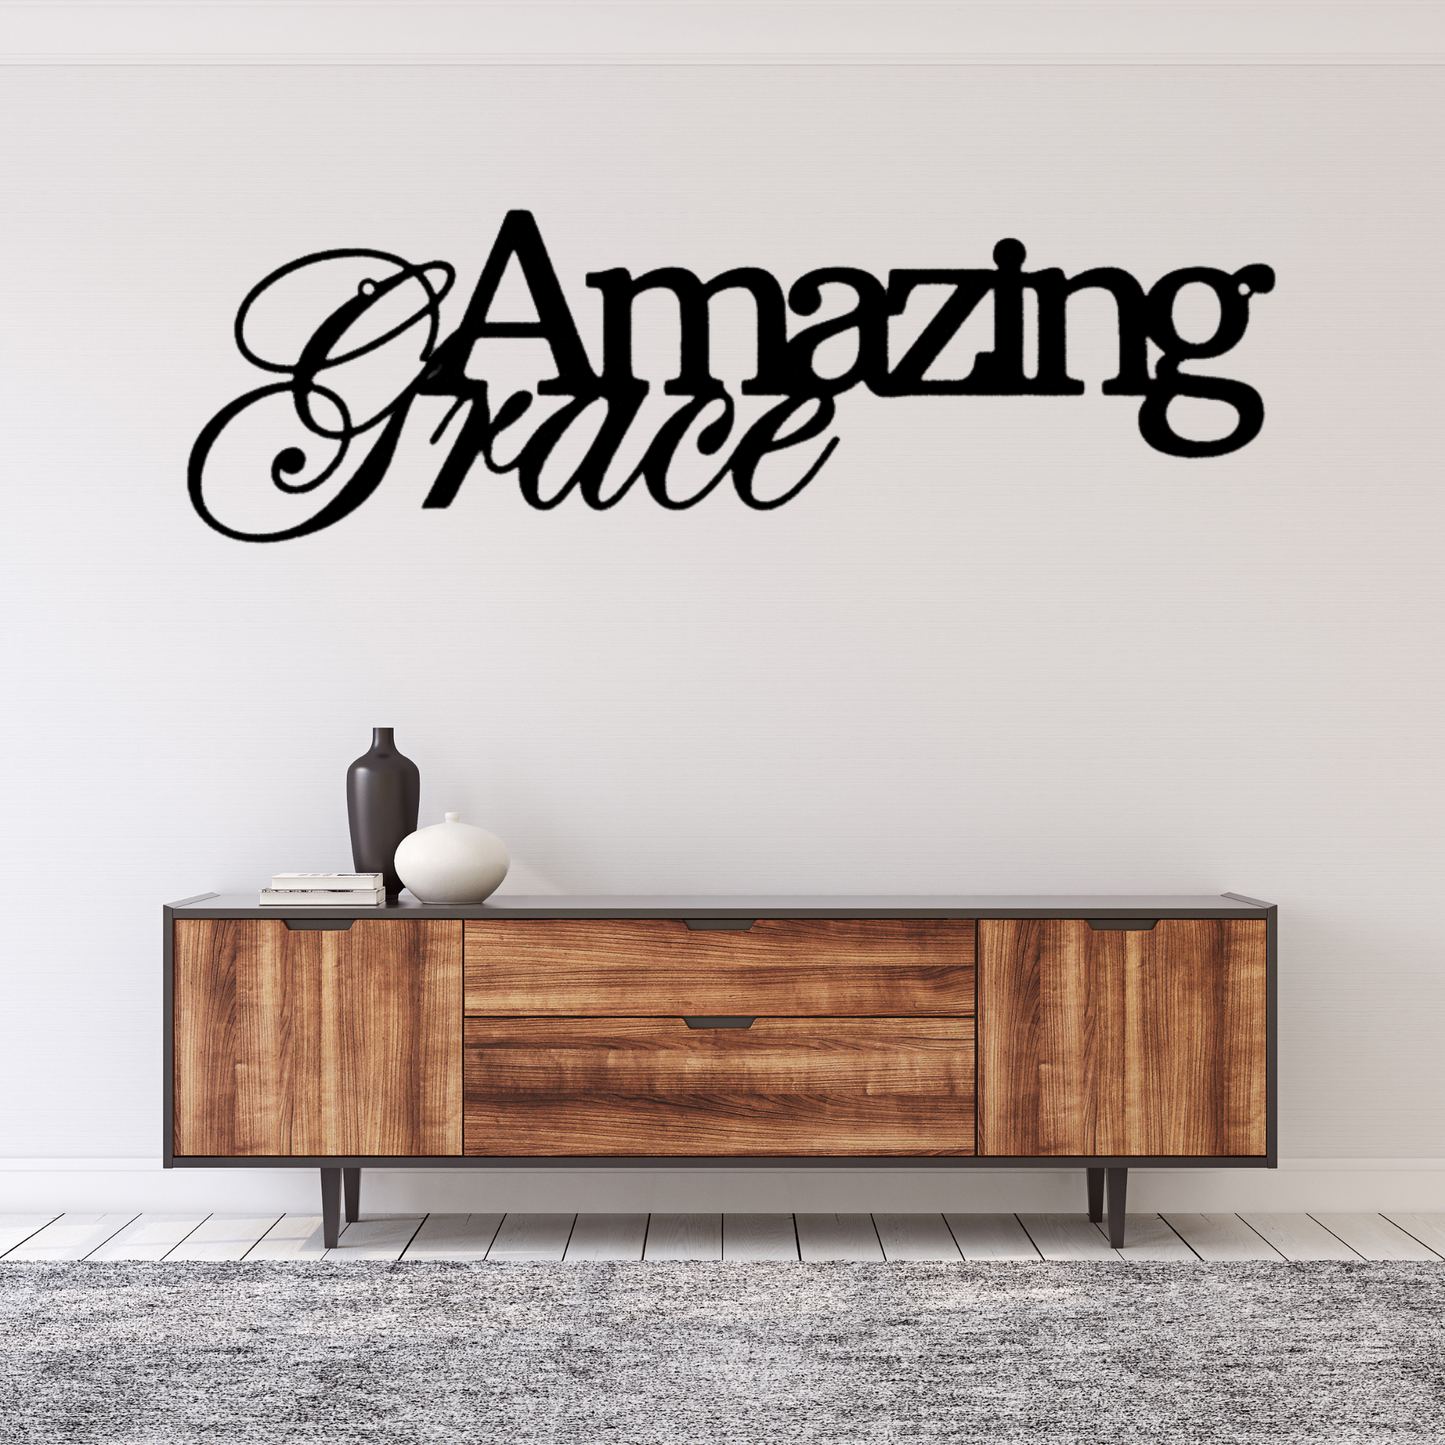 Amazing Grace - Steel Sign, Steel Signs, House Decor, Wall Art, Outdoor Signs, Metal Signs, Metal Decorative Sign, Indoor Sign